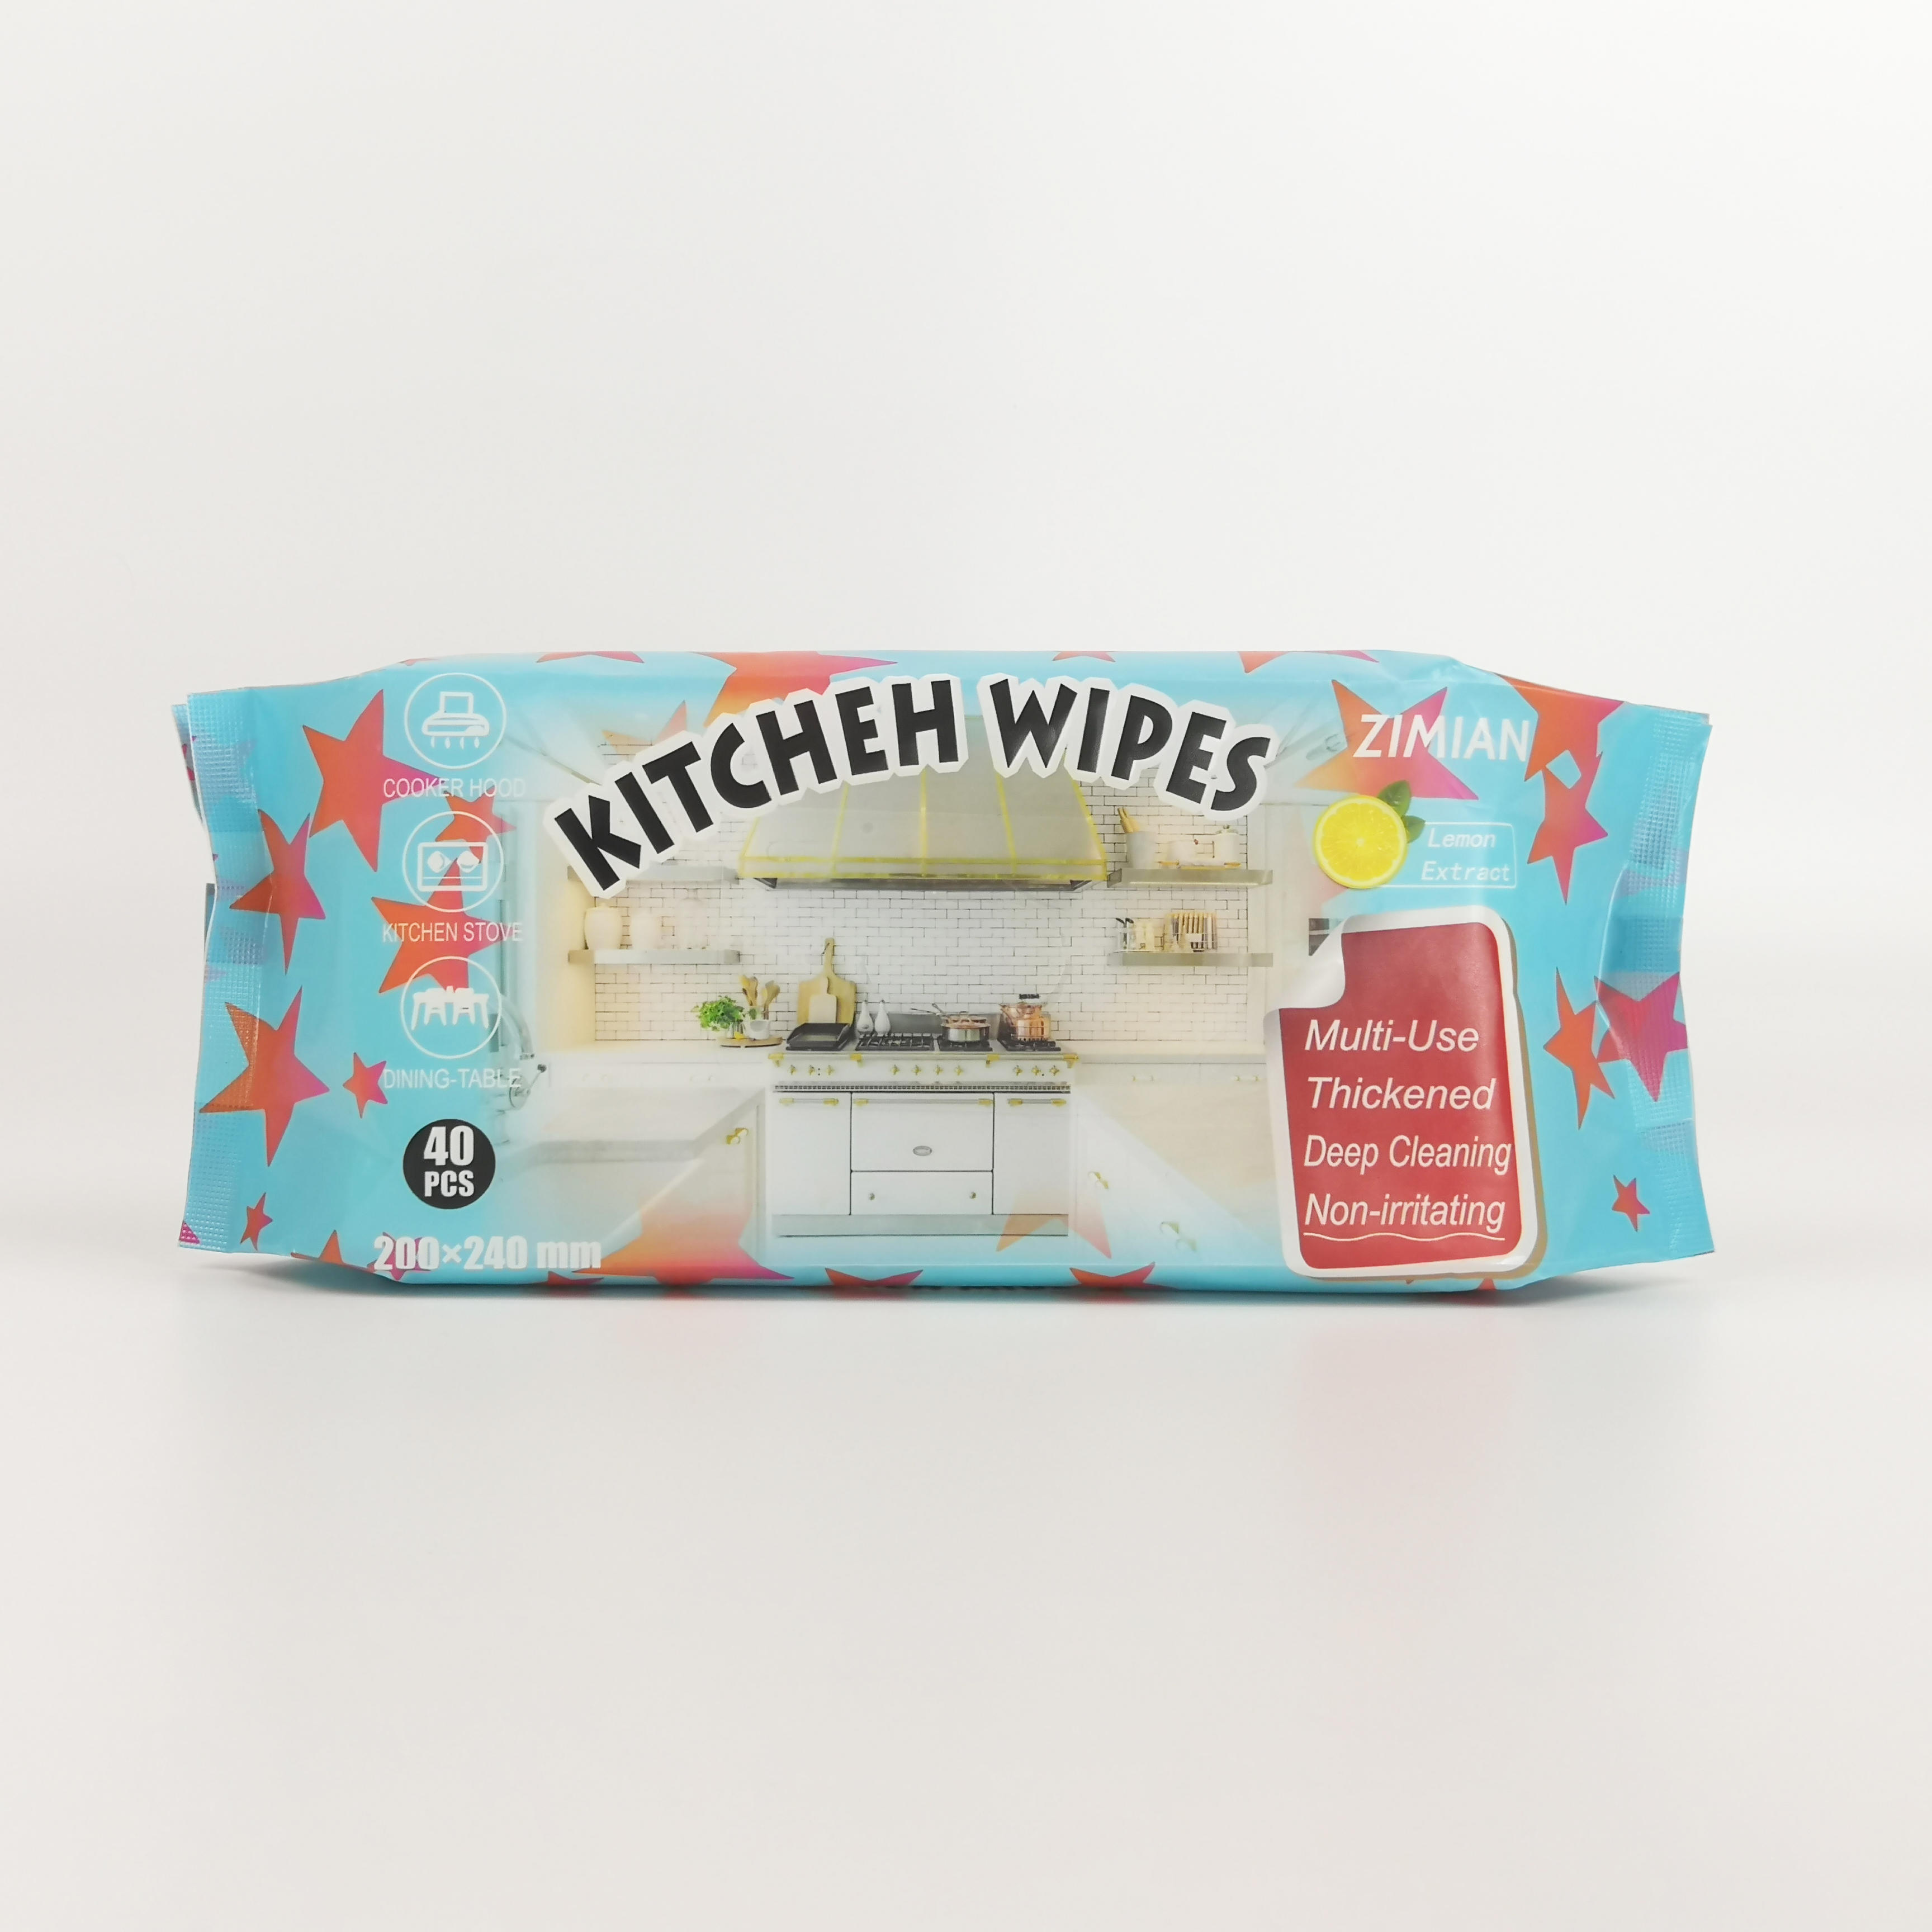 Multi-Surface Wipes Manufacturer 40pcs Wet Wipes Suitable for Home Kitchen and Bathroom cCeaning